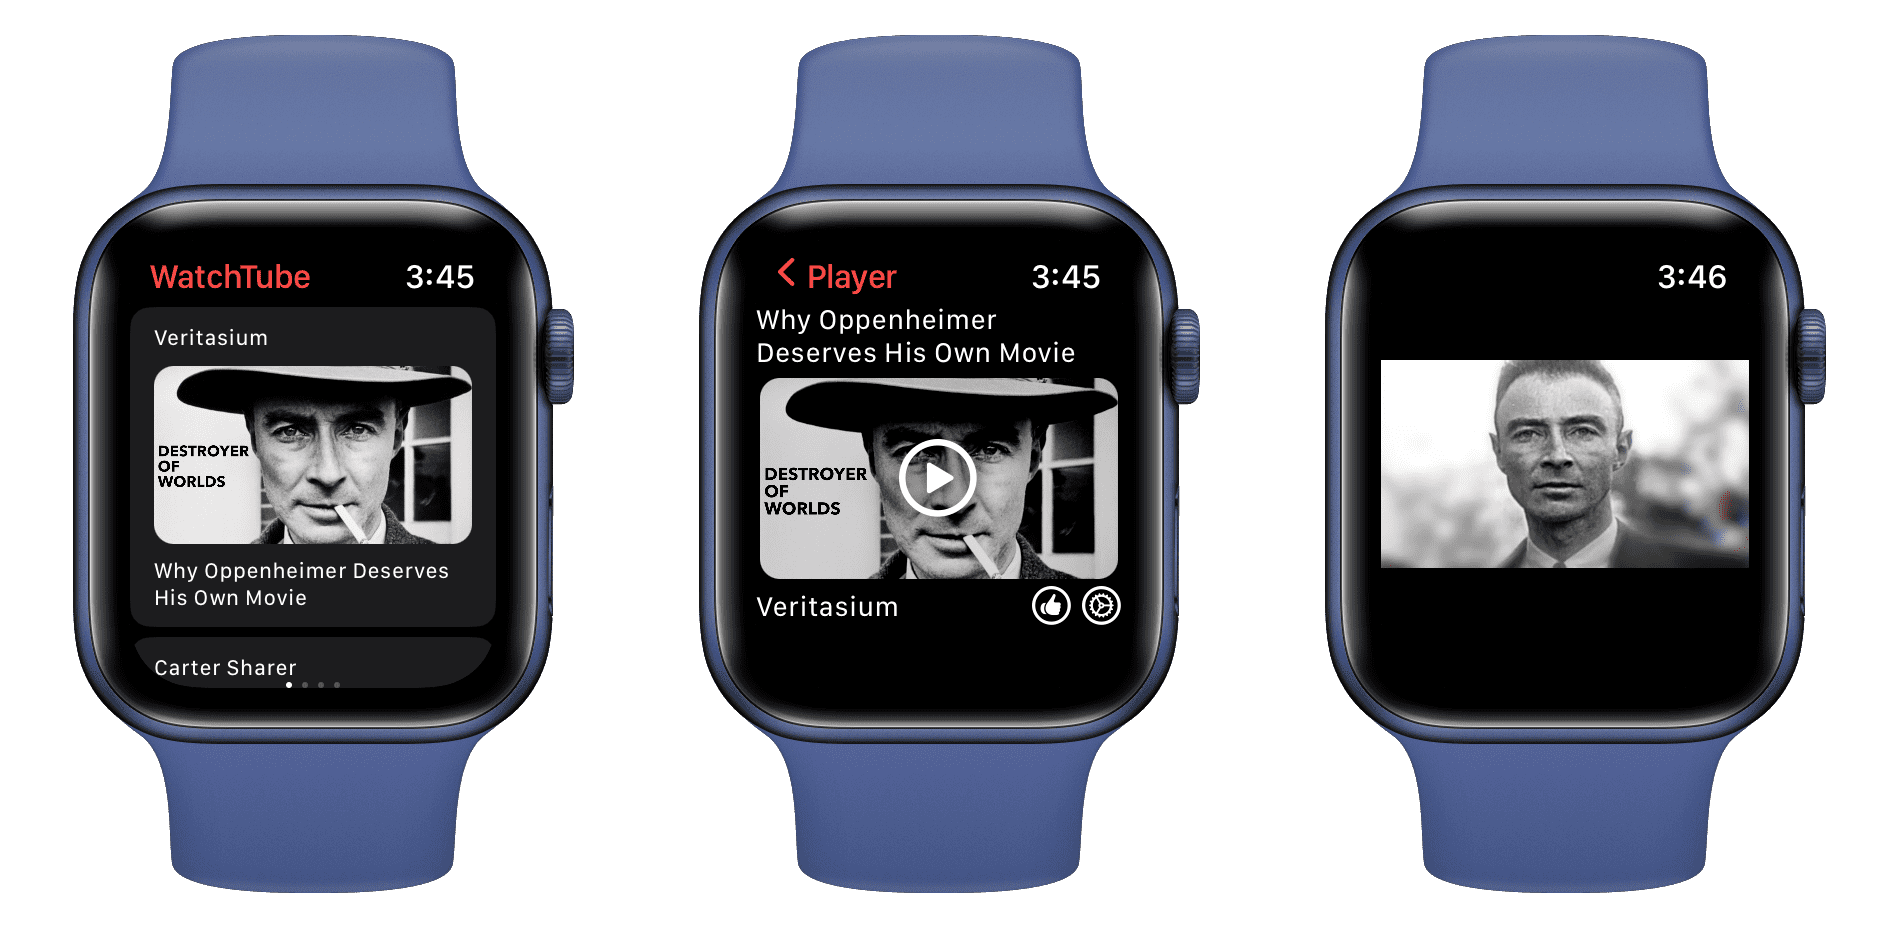 Playing a curated YouTube video on Apple Watch